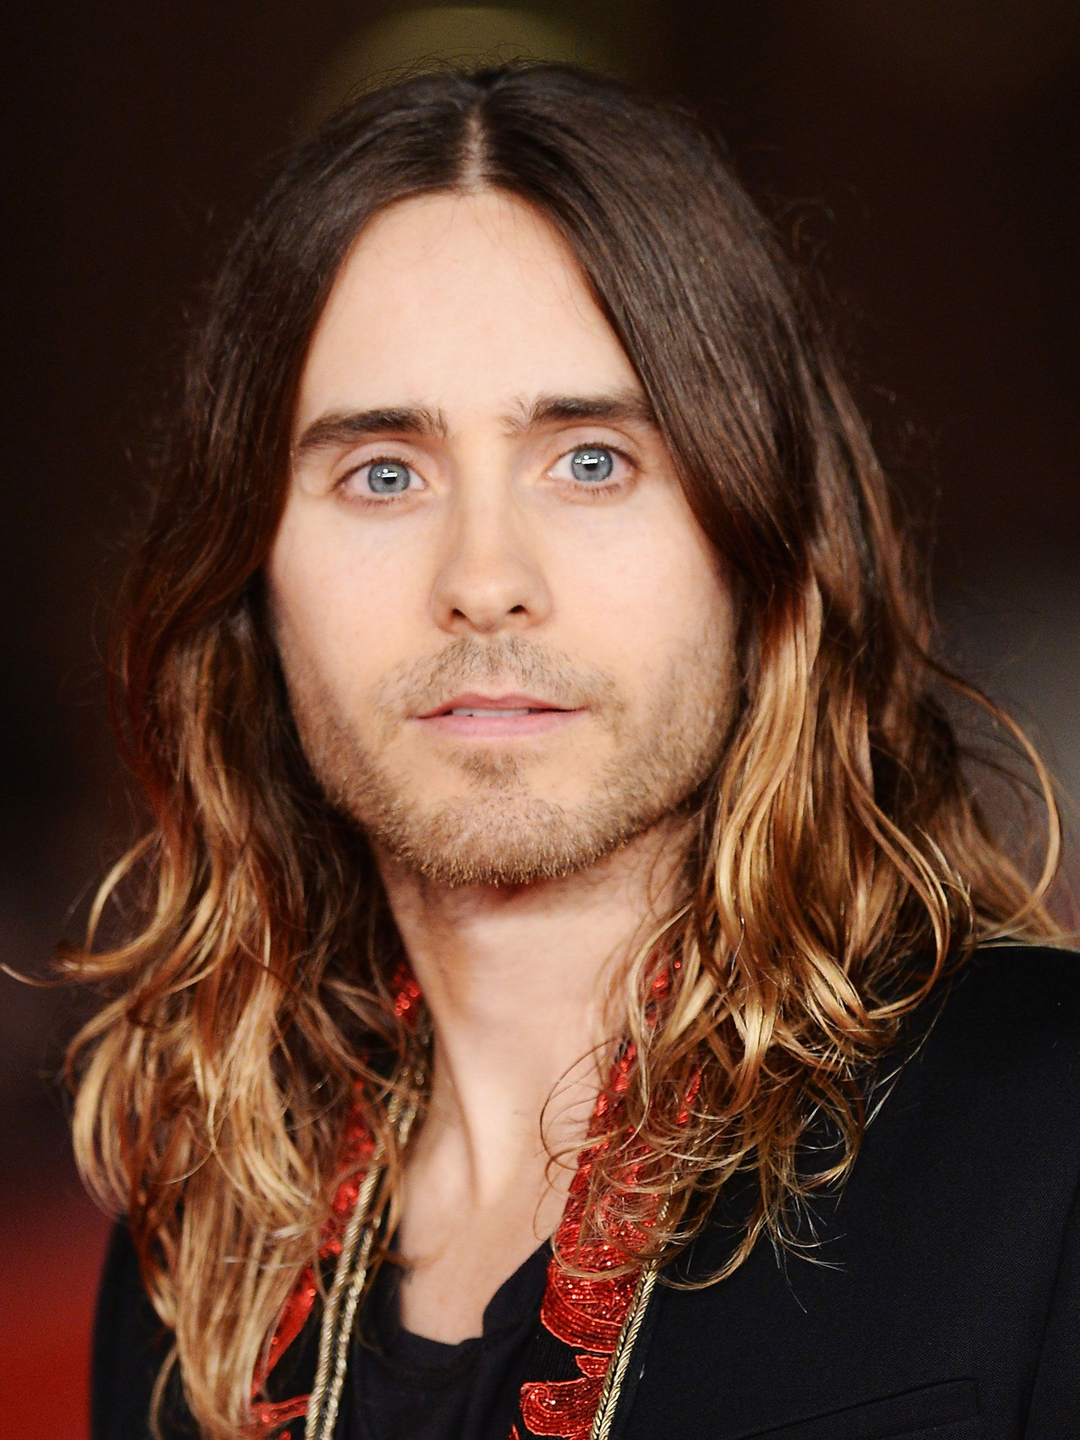 Jared Leto where did he study